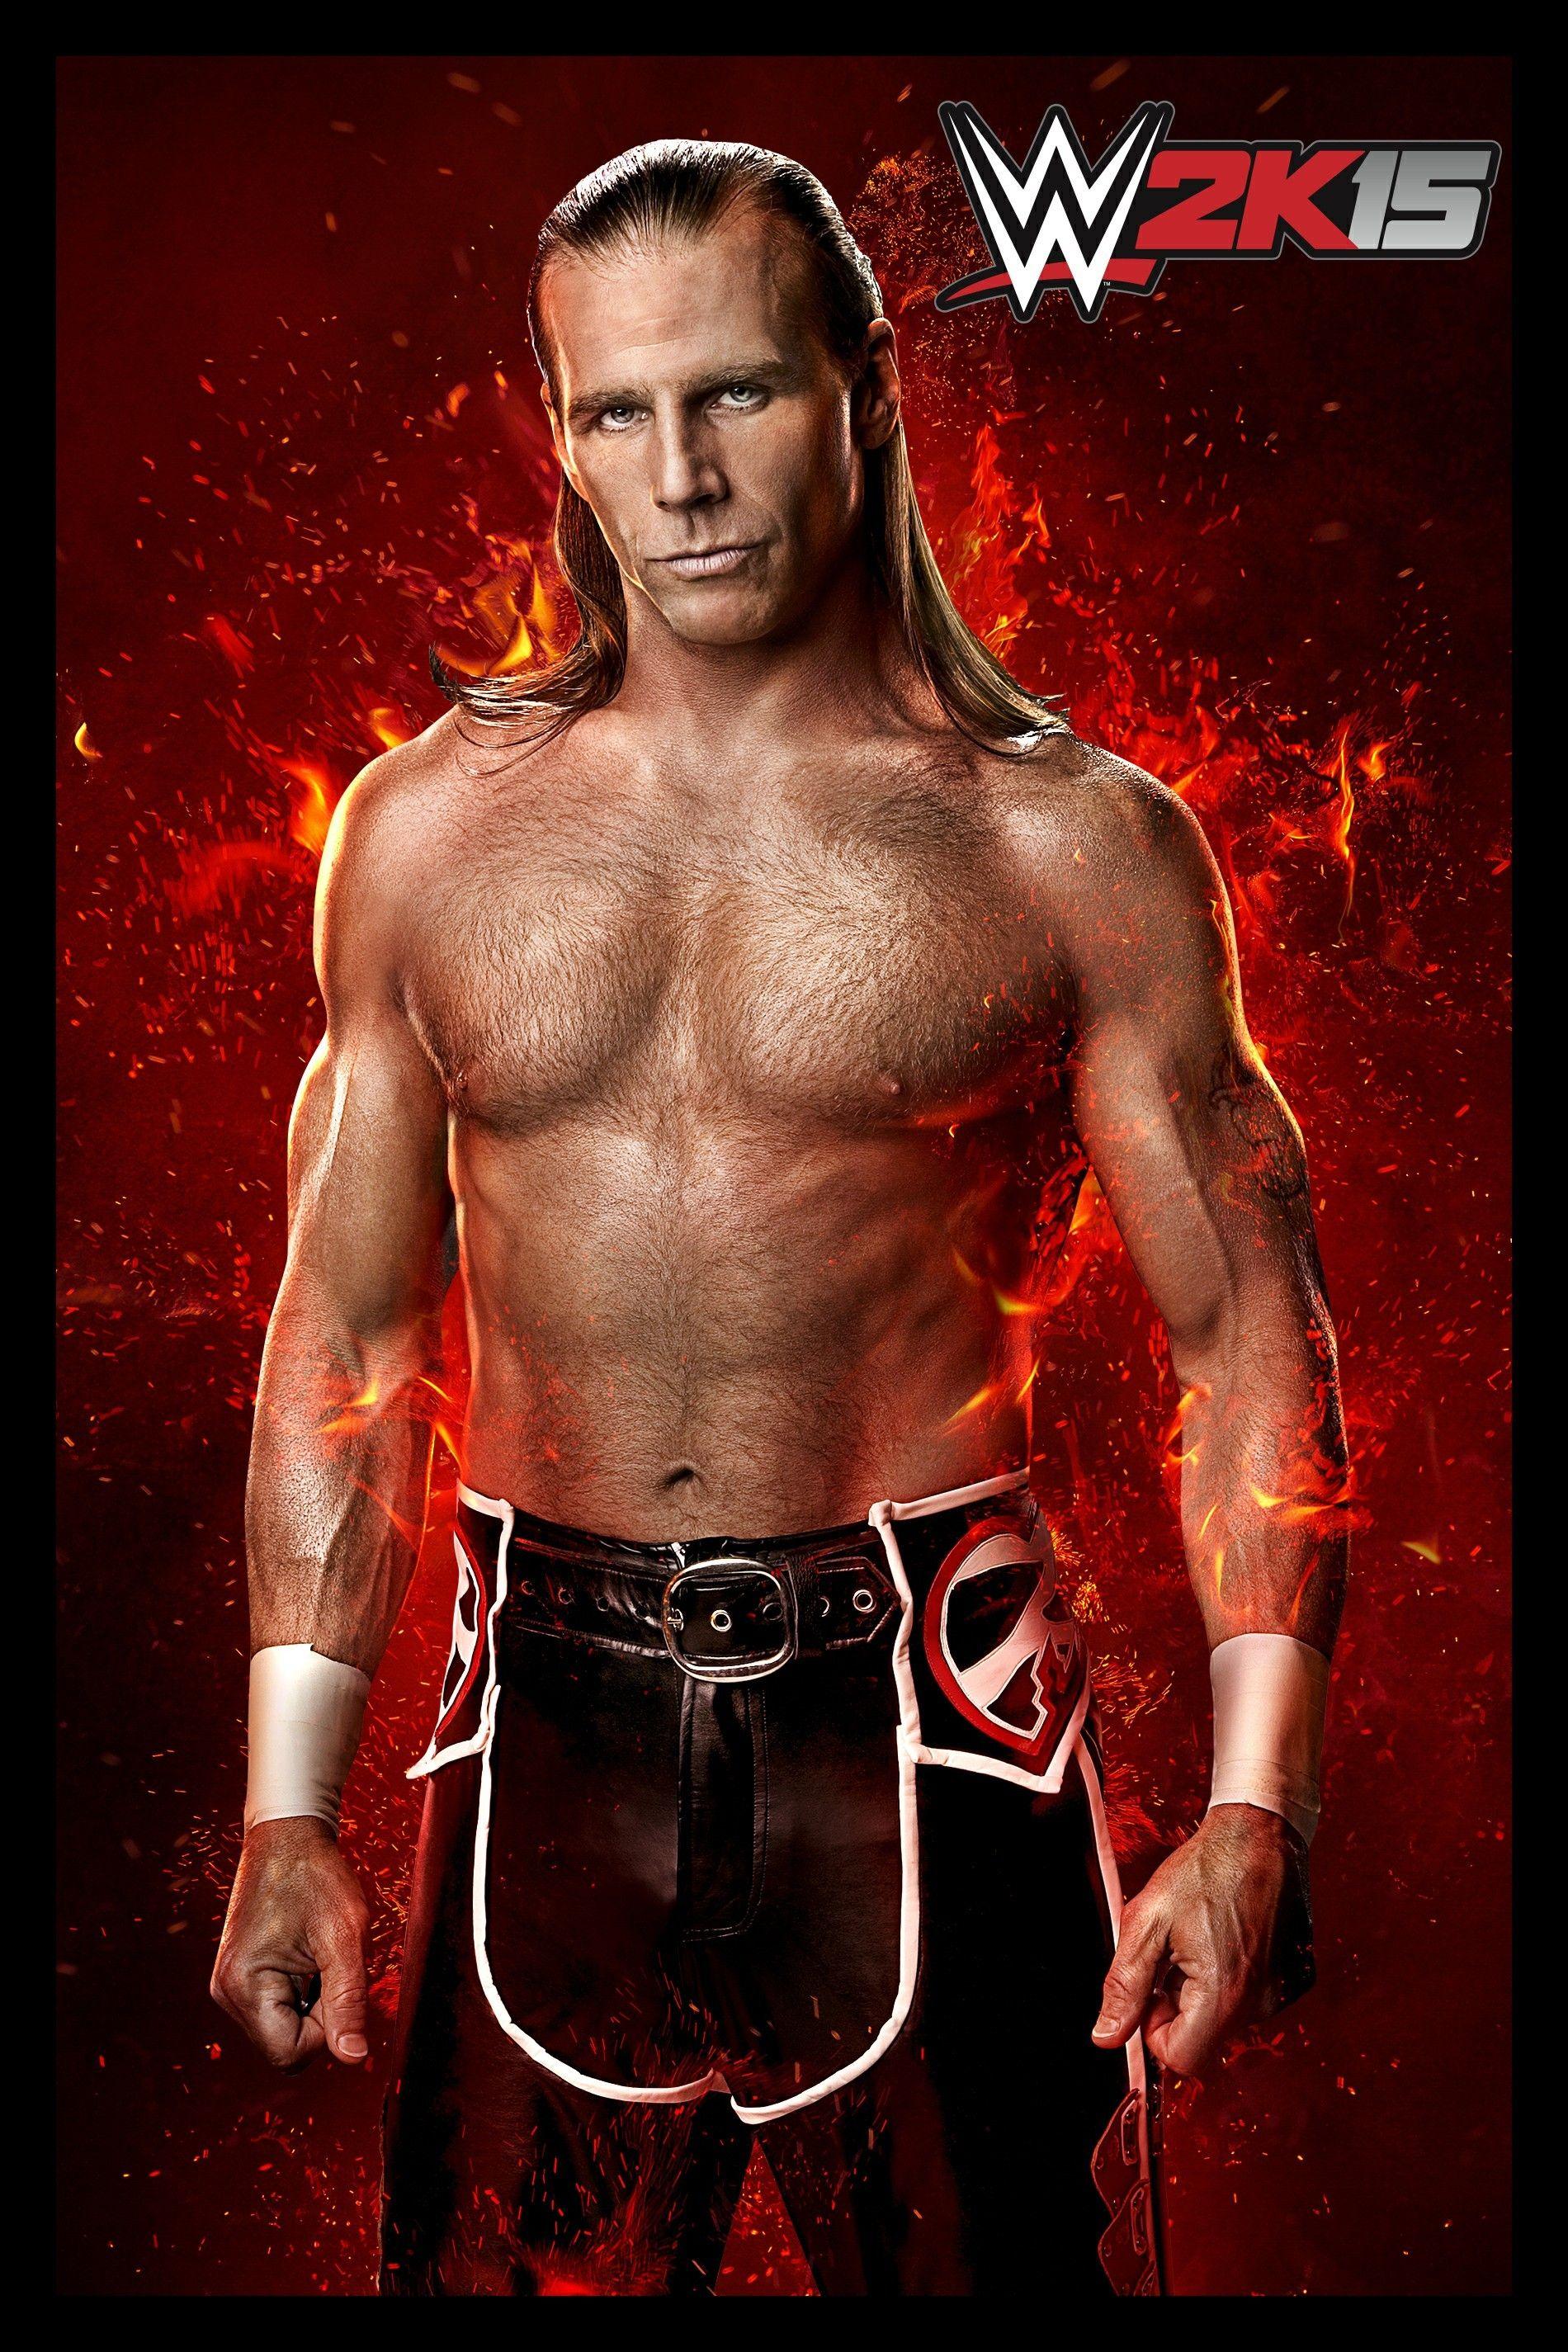 Bret Hart and Shawn Michaels Wallpapers by MrEnjoy on DeviantArt